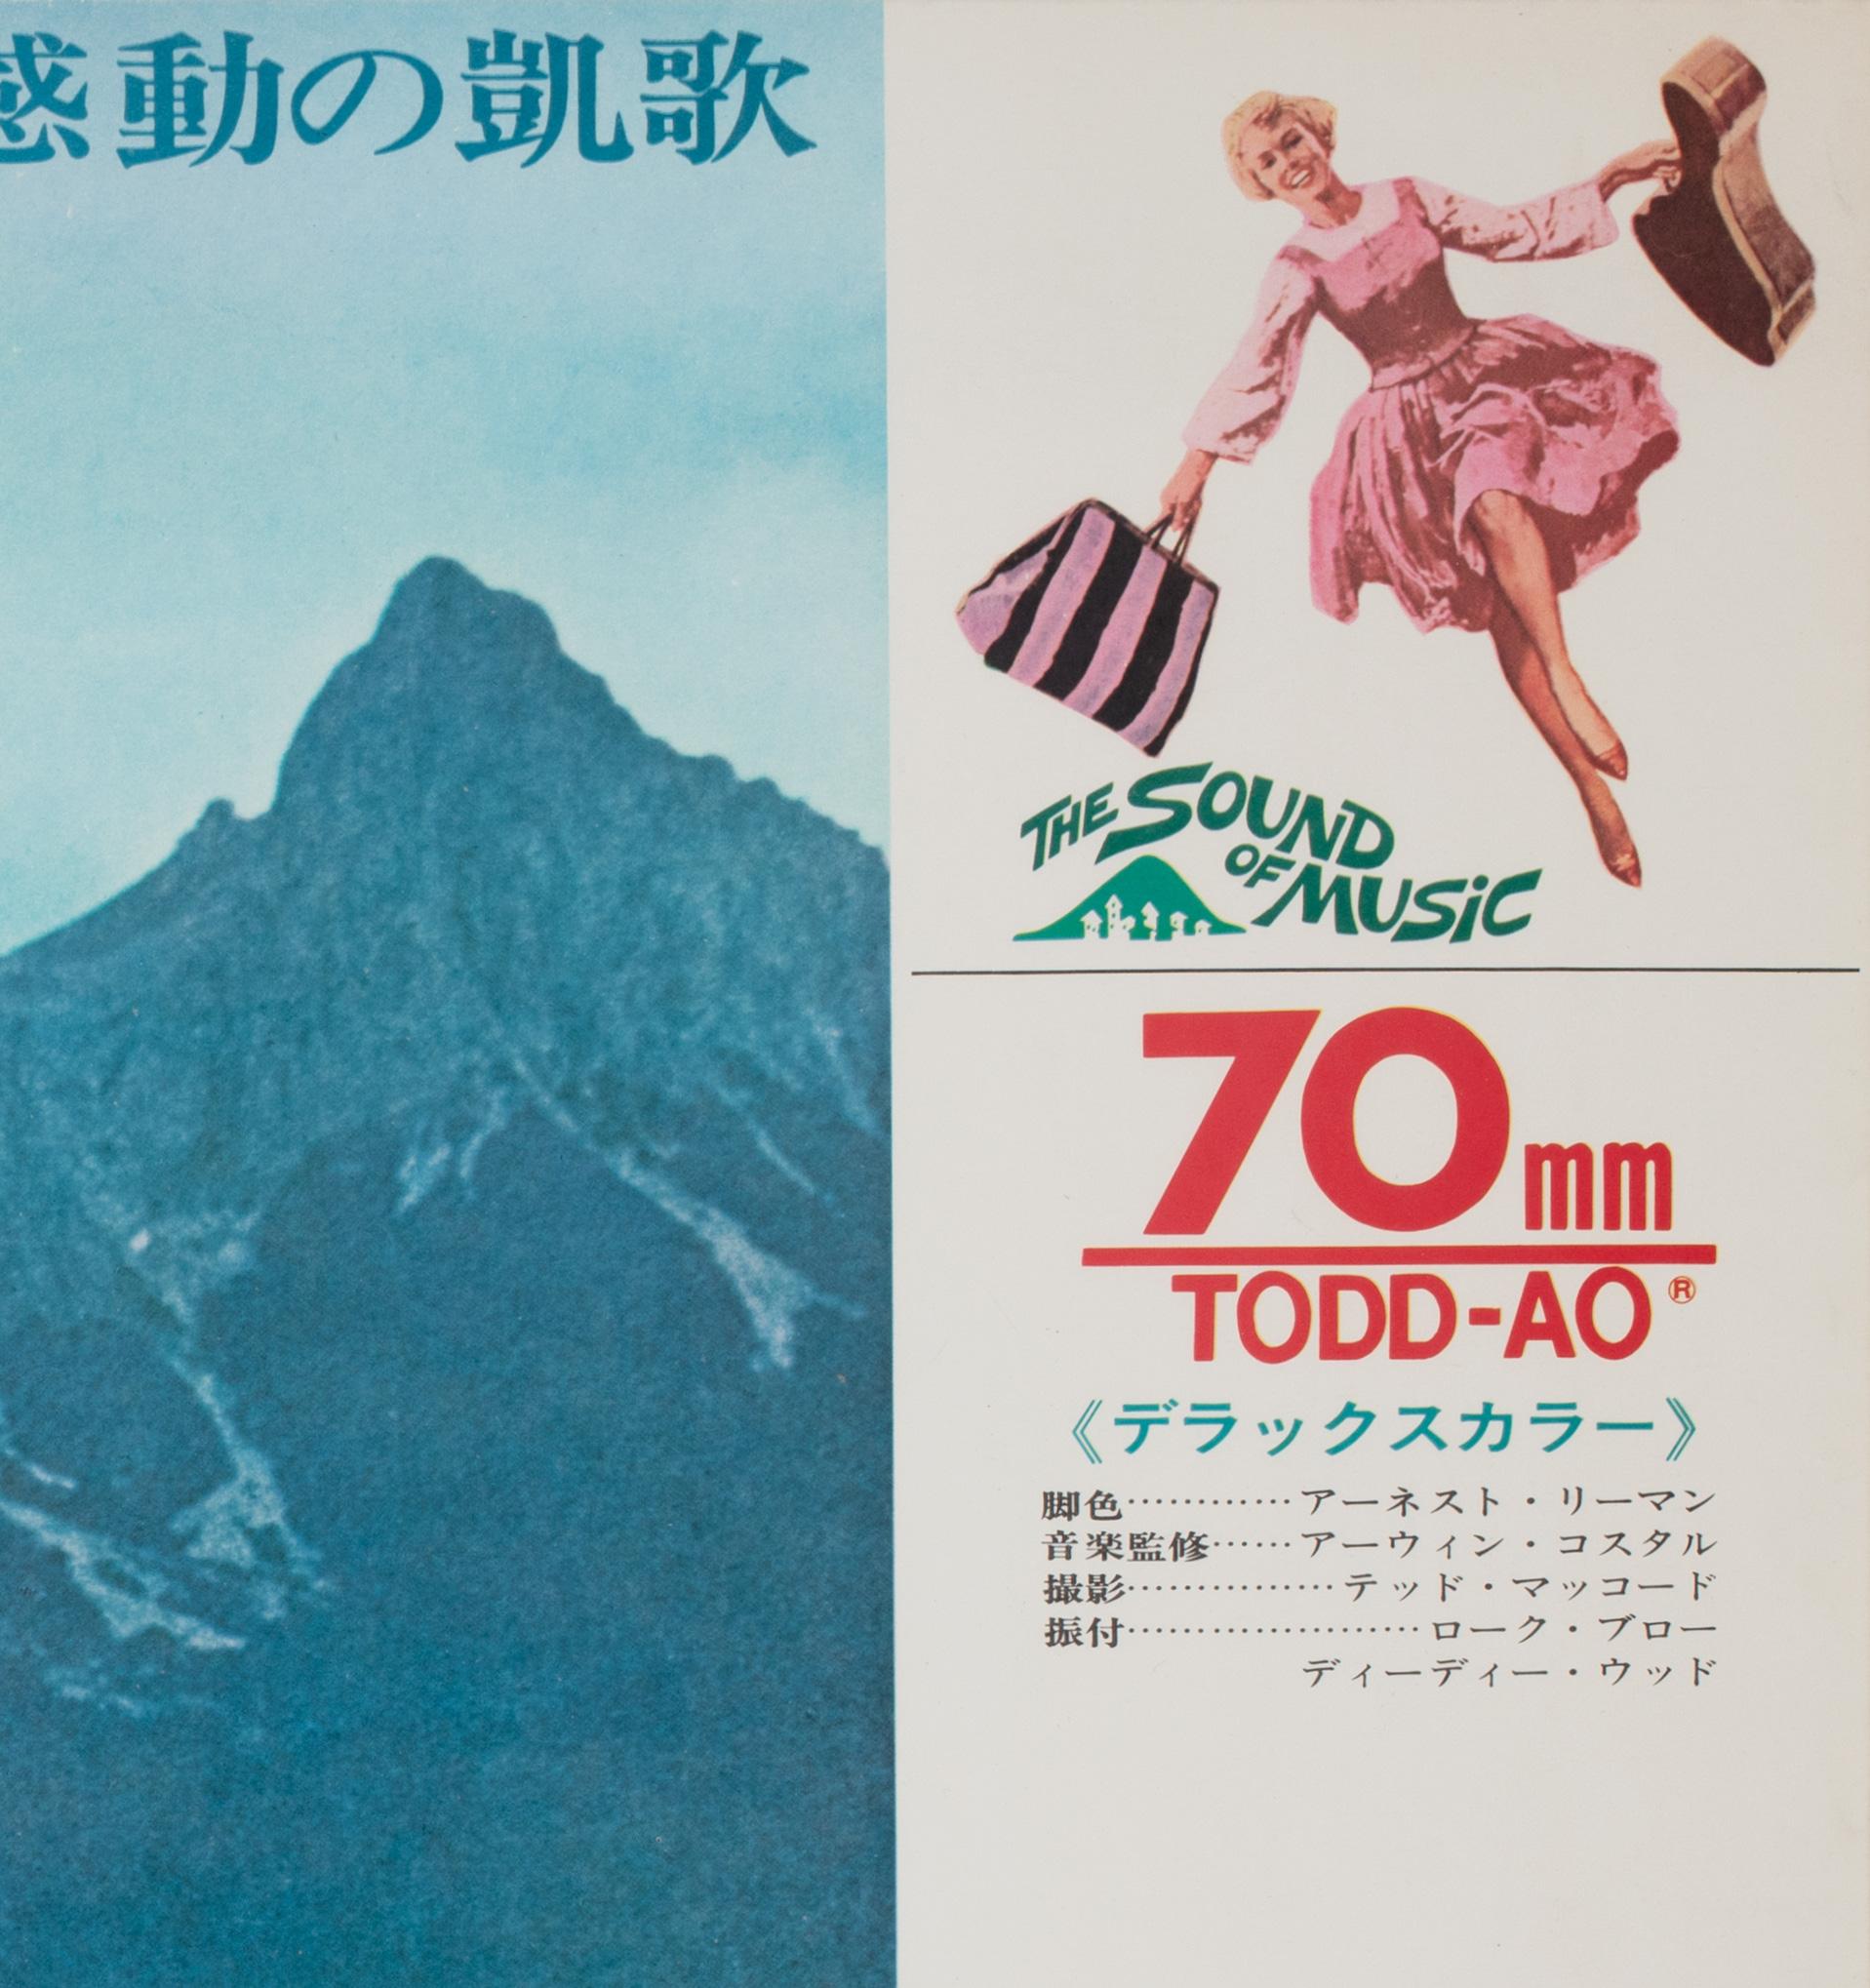 Paper The Sound of Music 1965 Japanese B1 'Roadshow' Film Poster For Sale